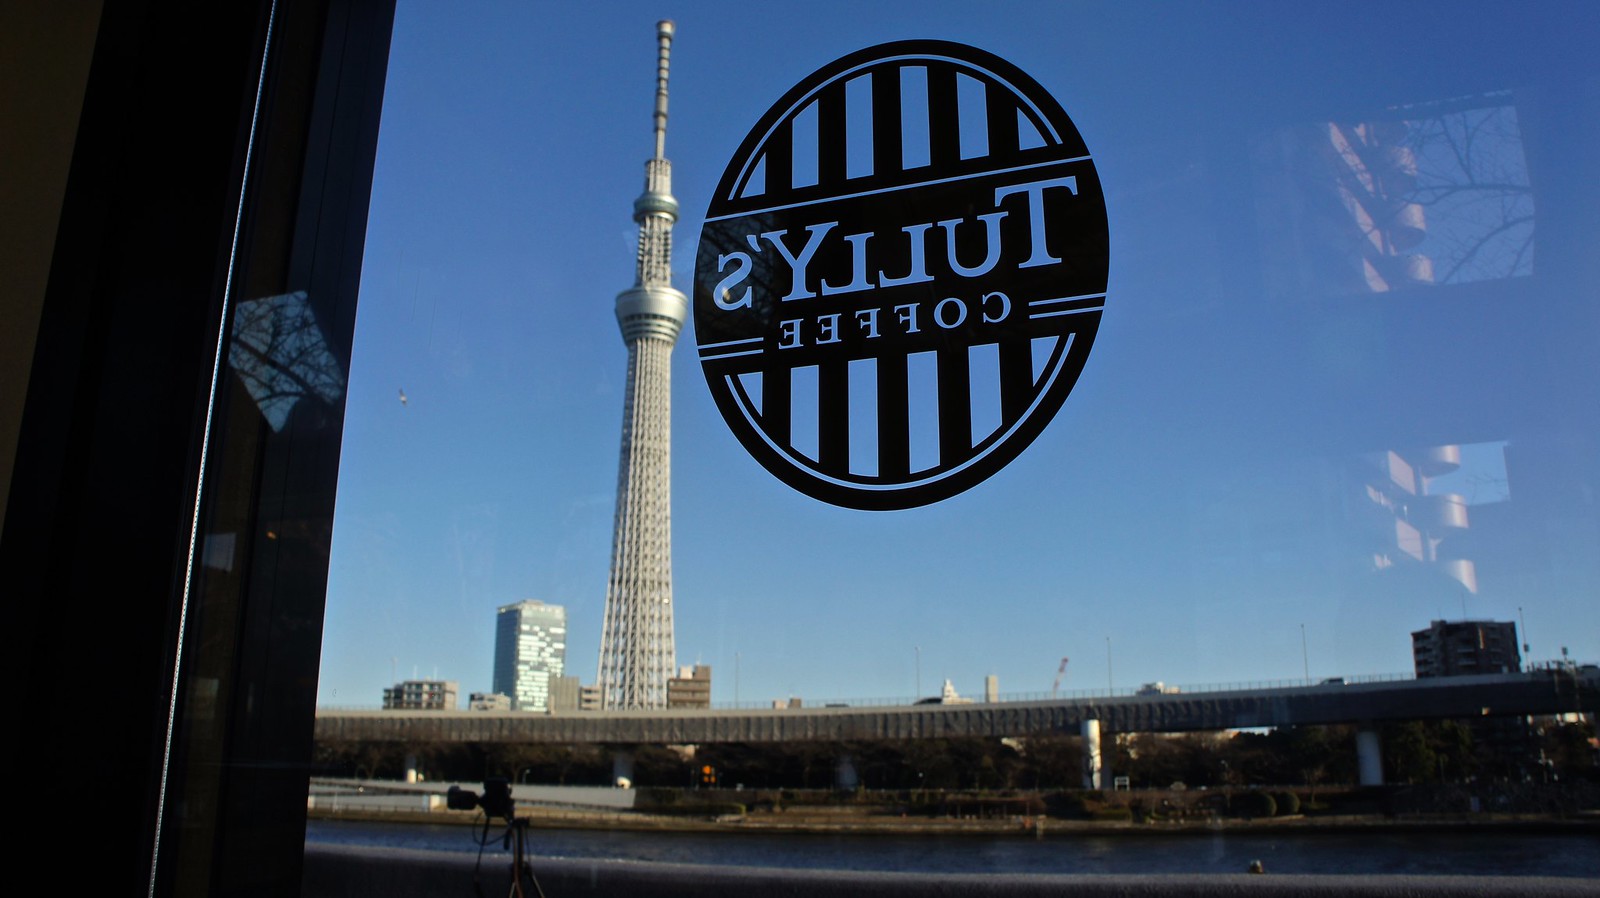 Skytree view from Tully's Coffee Cafe by the Sumida River